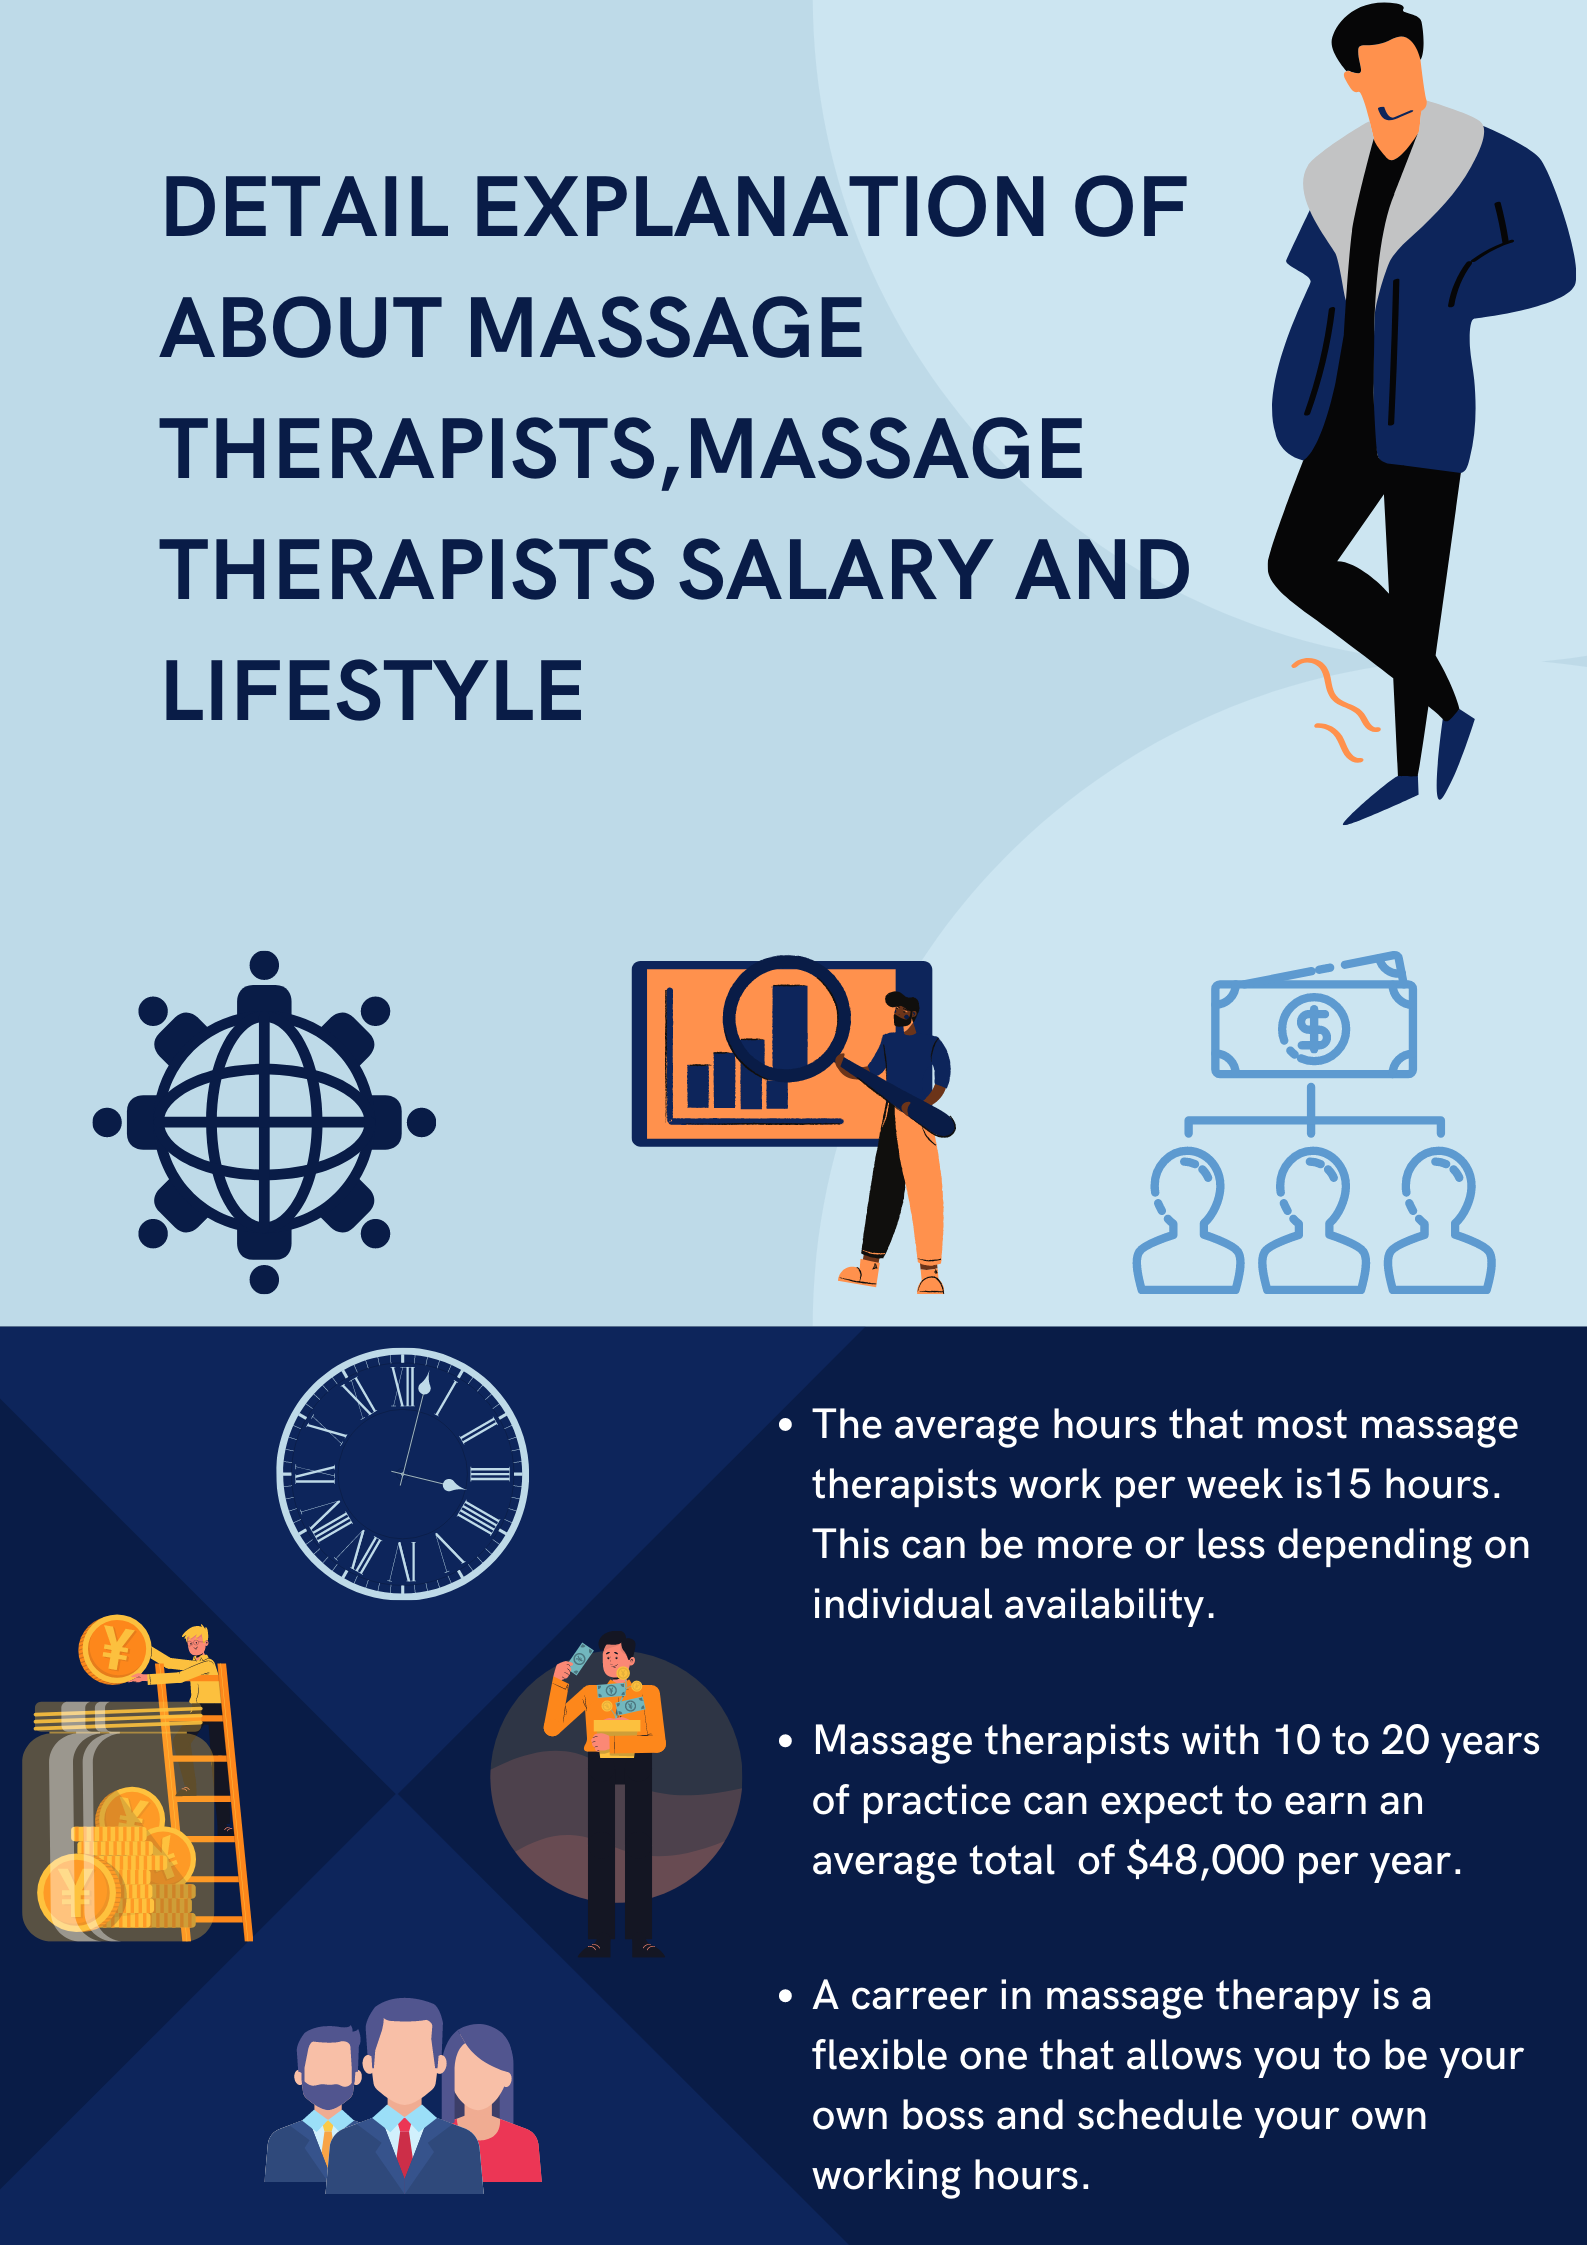 DETAIL EXPLANATION OF ABOUT MASSAGE THERAPISTSMASSAGE THERAPISTS SALARY AND LIFESTYLE 1 